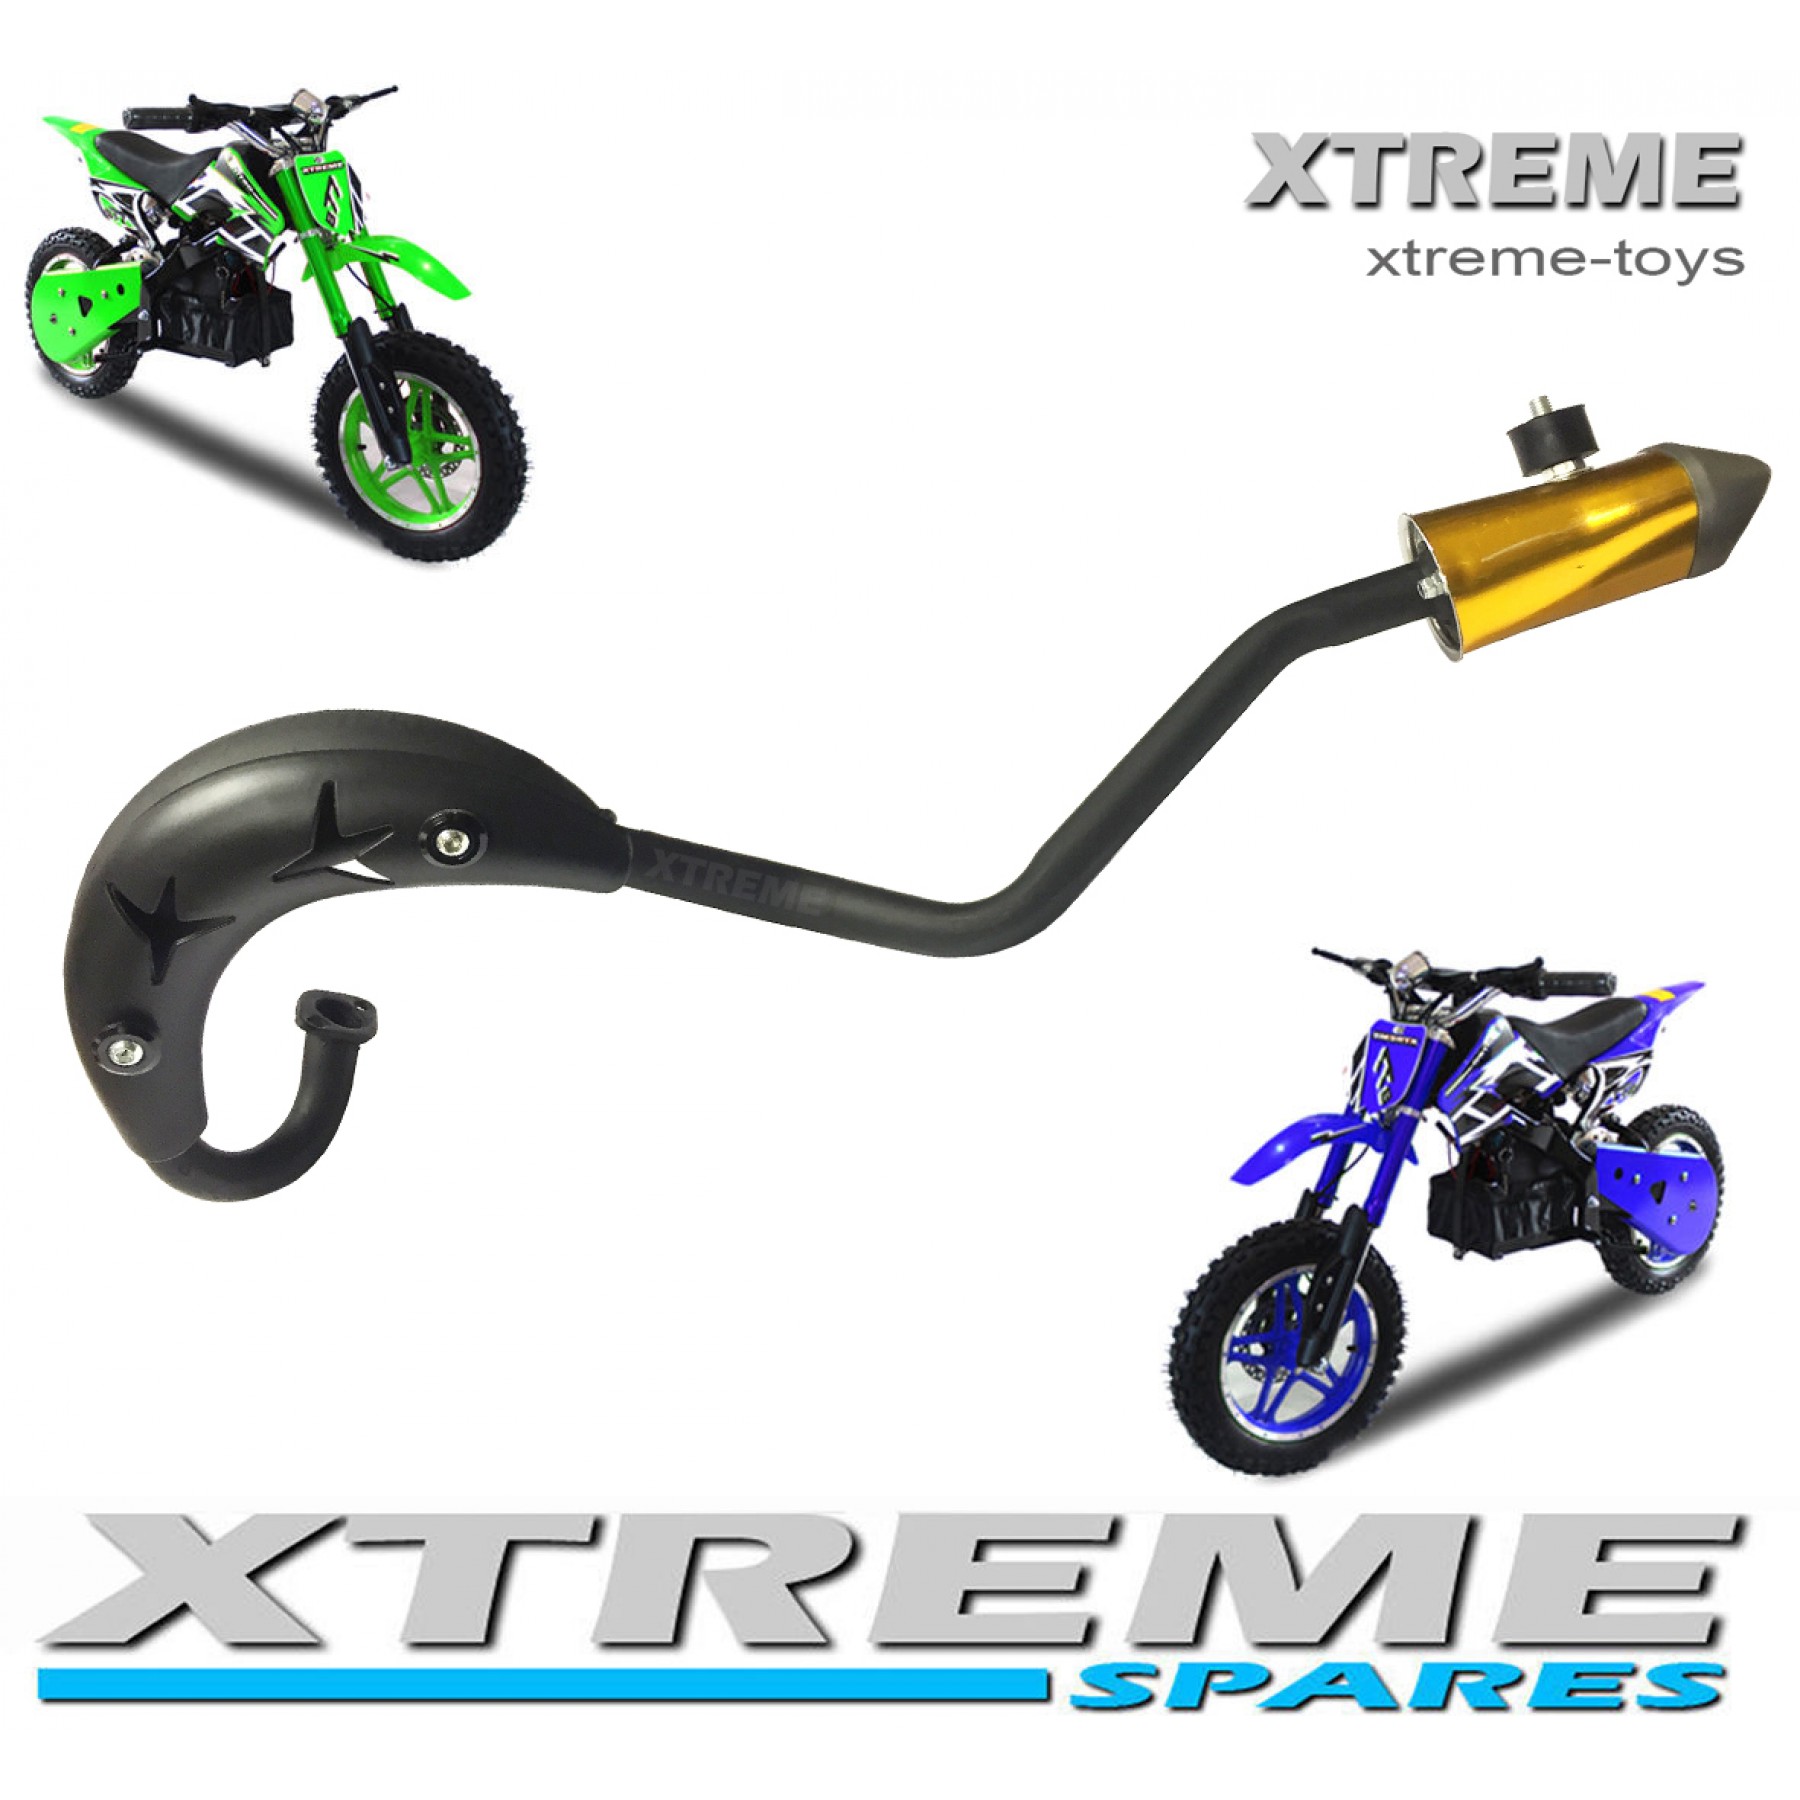 MINI MOTO/ DIRT BIKE/ PIT BIKE COMPLETE EXHAUST PIPE SET WITH EXHAUST COVER 49-50cc